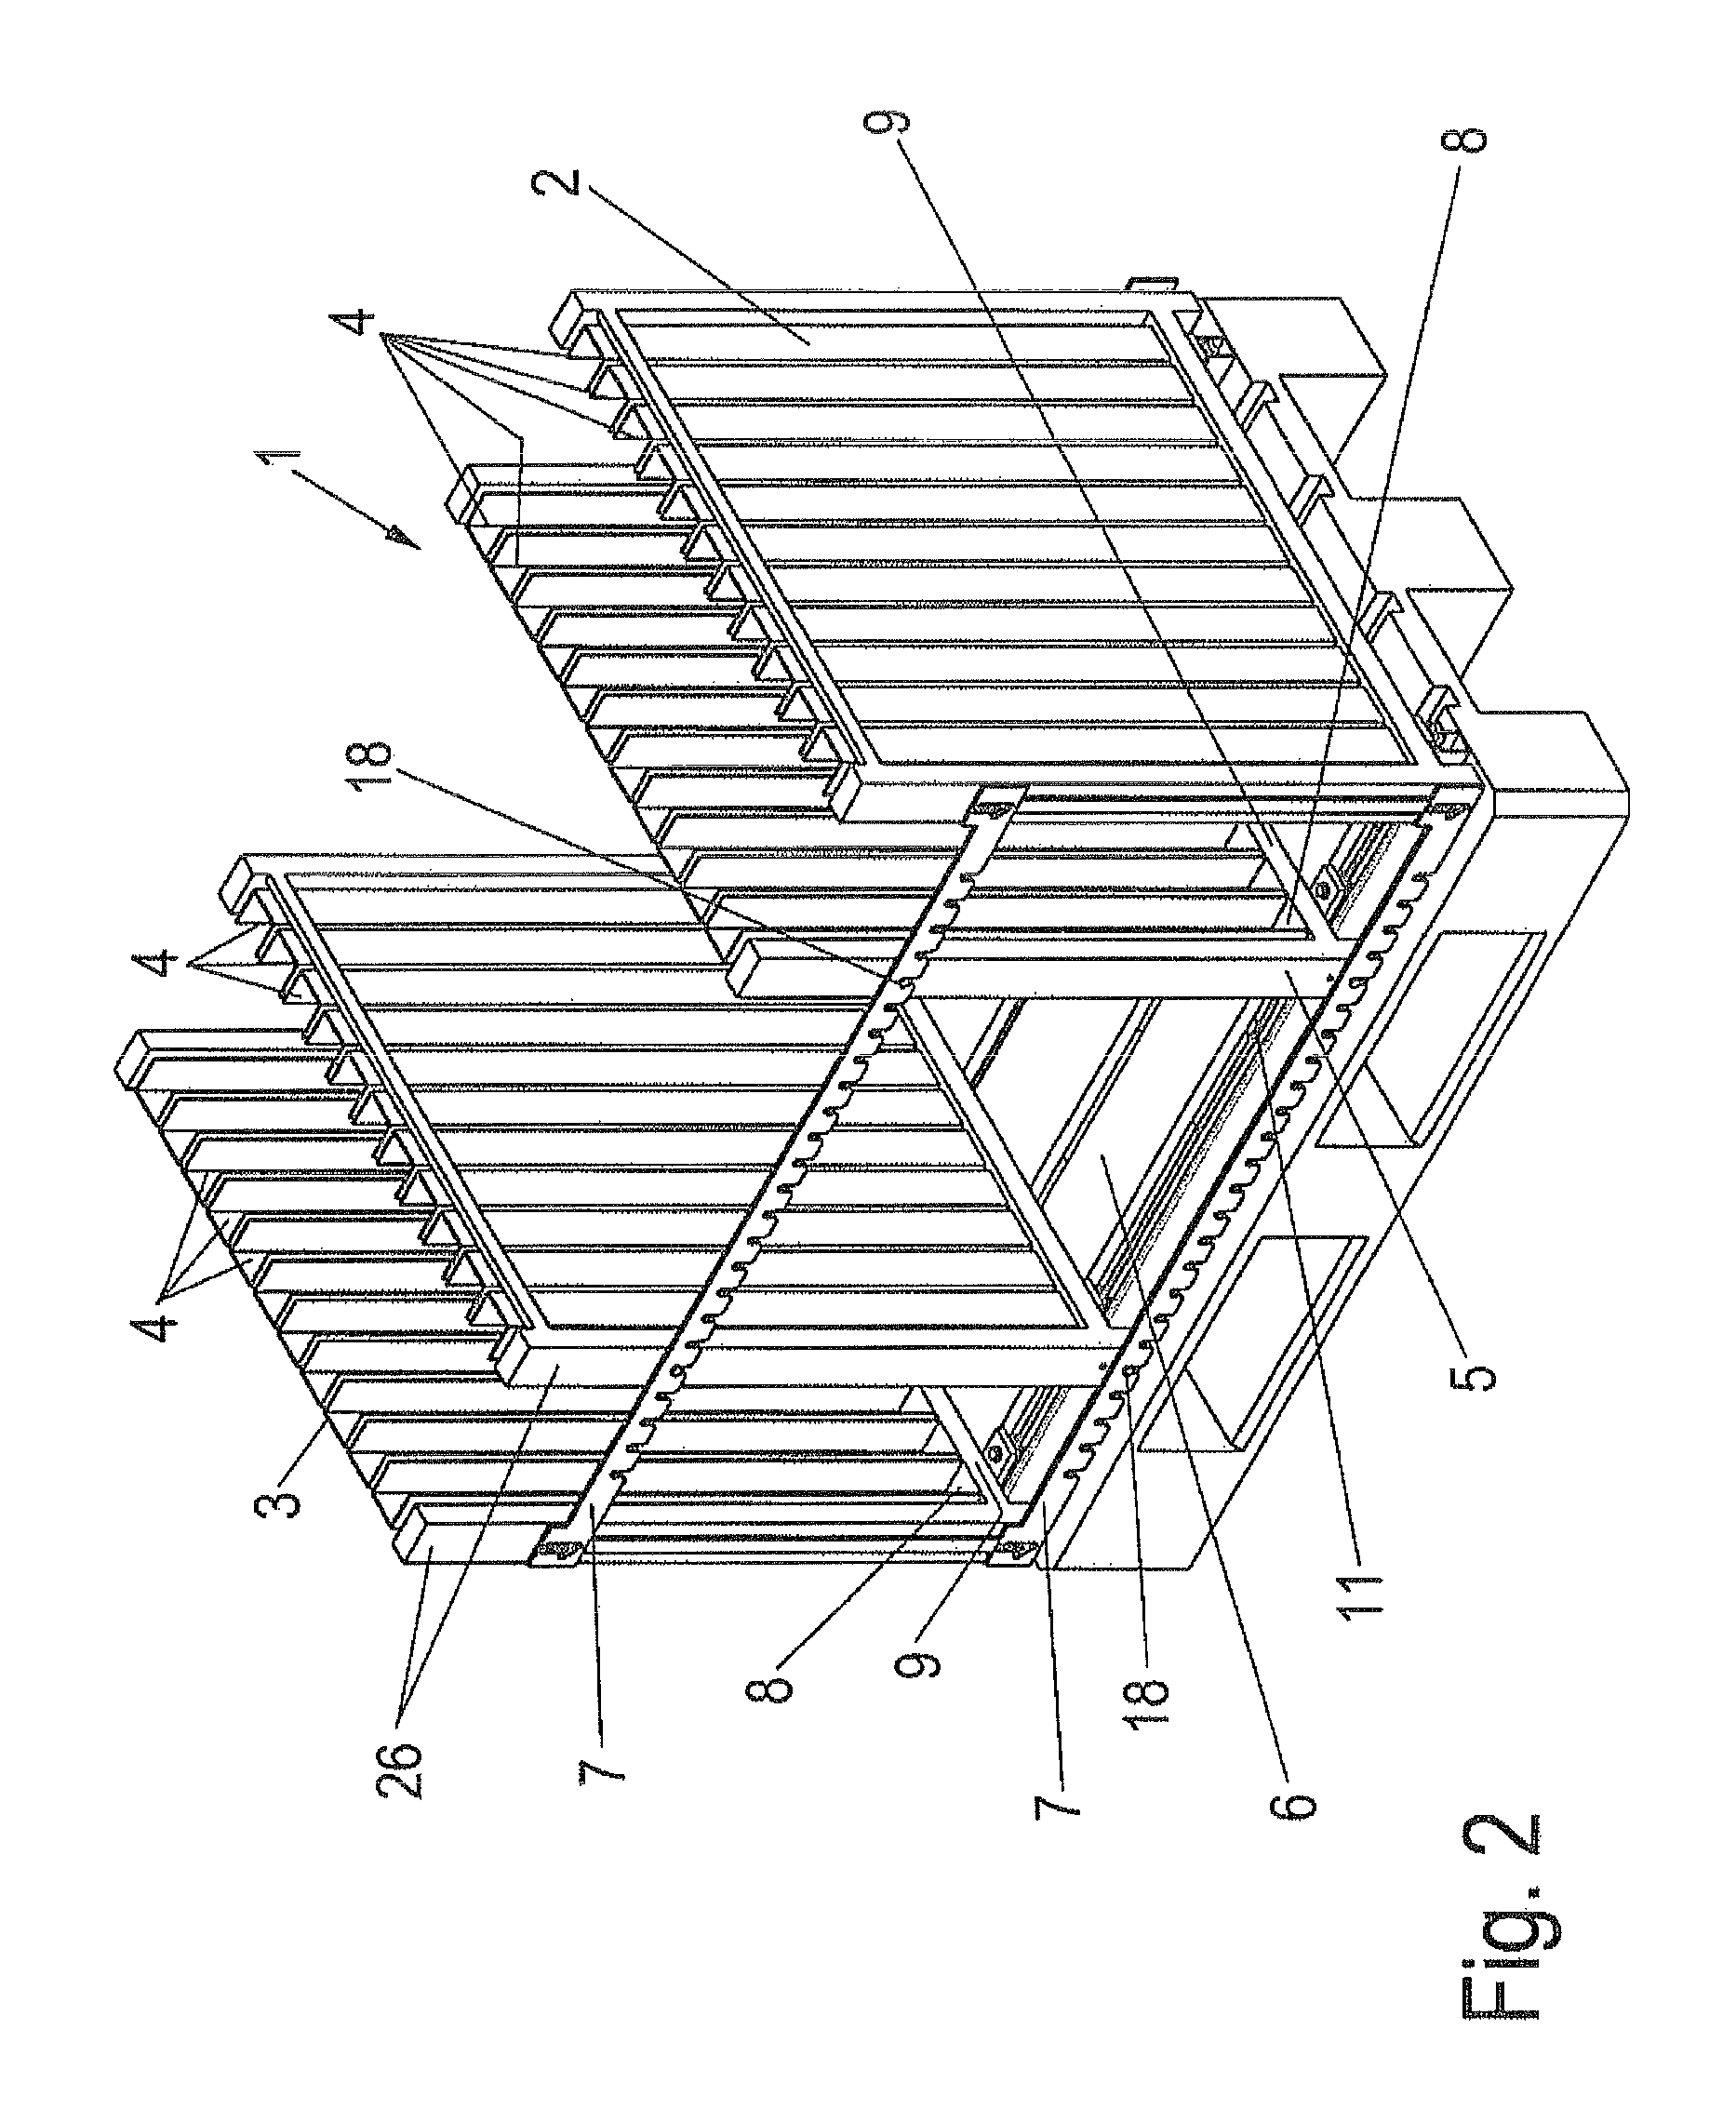 Device for transporting objects